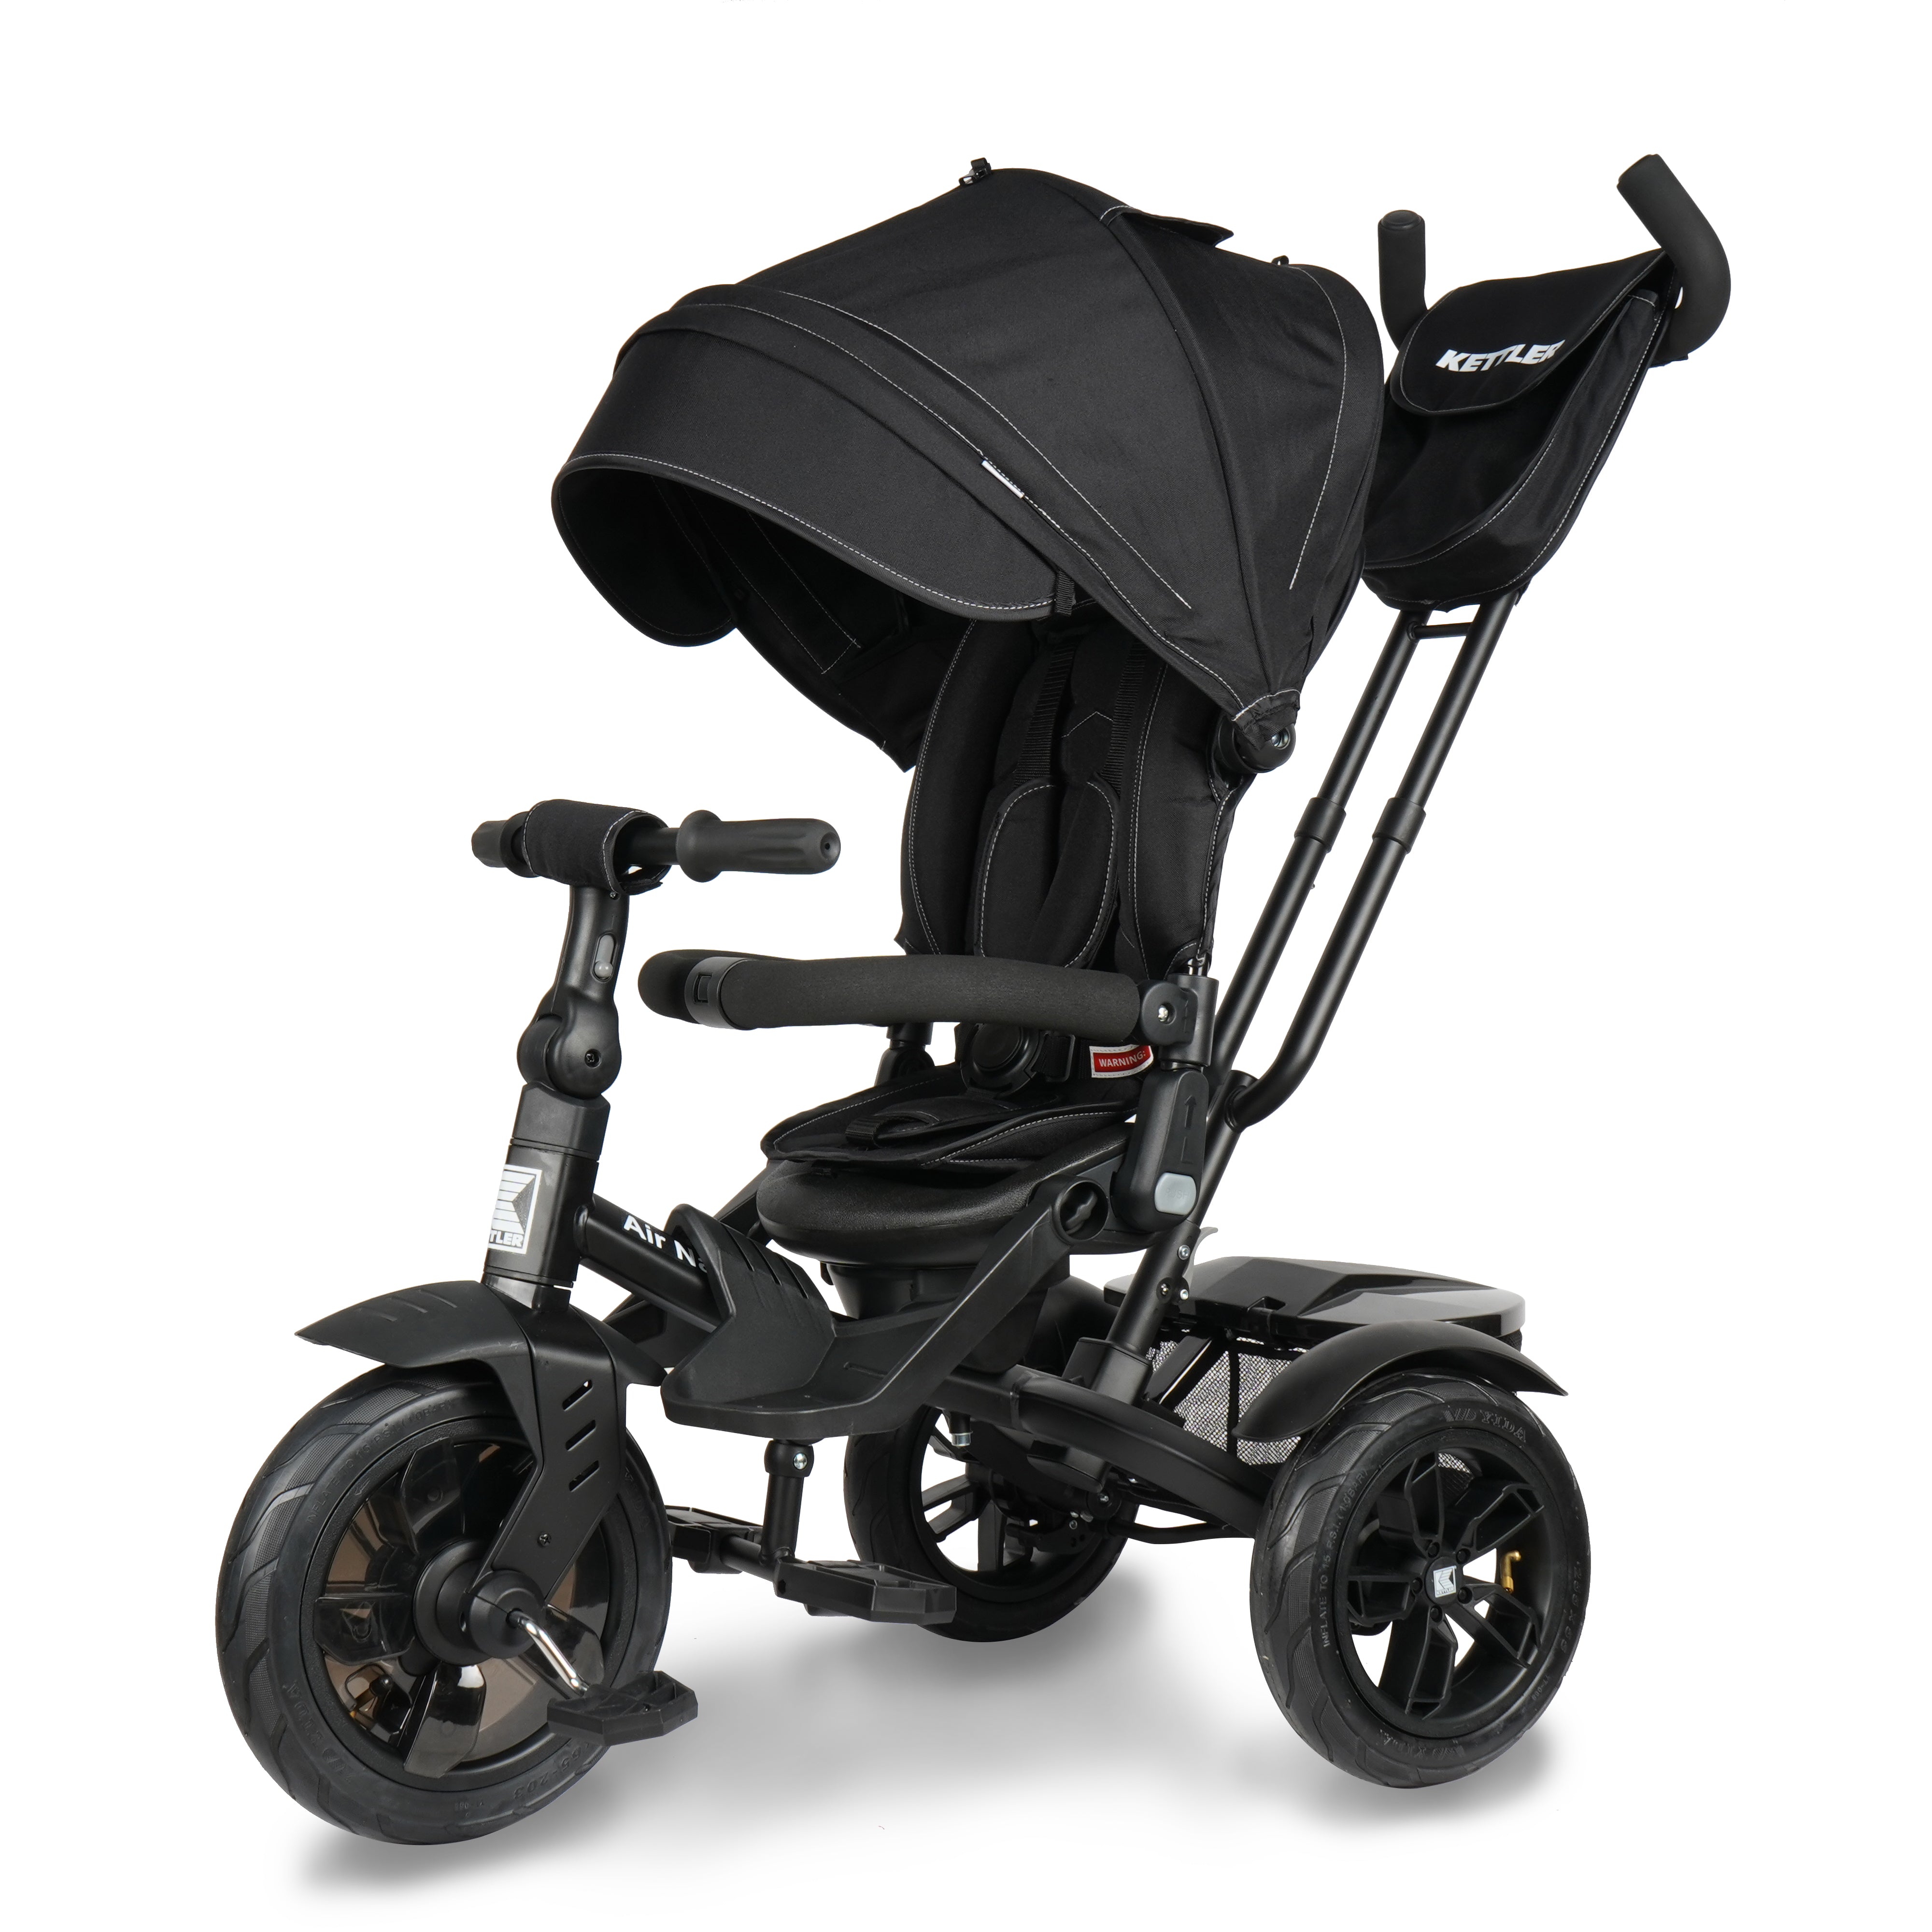 The KETTLER Air Navigator 6 in 1 Trike's function grows with your kids from 10 to 72 months. It features a rotating and reclining seat with a removable footrest and a 5-point safety harness to keep your little one safe.  You can put diapers or toys in the push bar bag and also large rear basket. The adjustable telescopic parent handle, foot brake and freewheeling function allow you to easily steer and control in the parent mode.